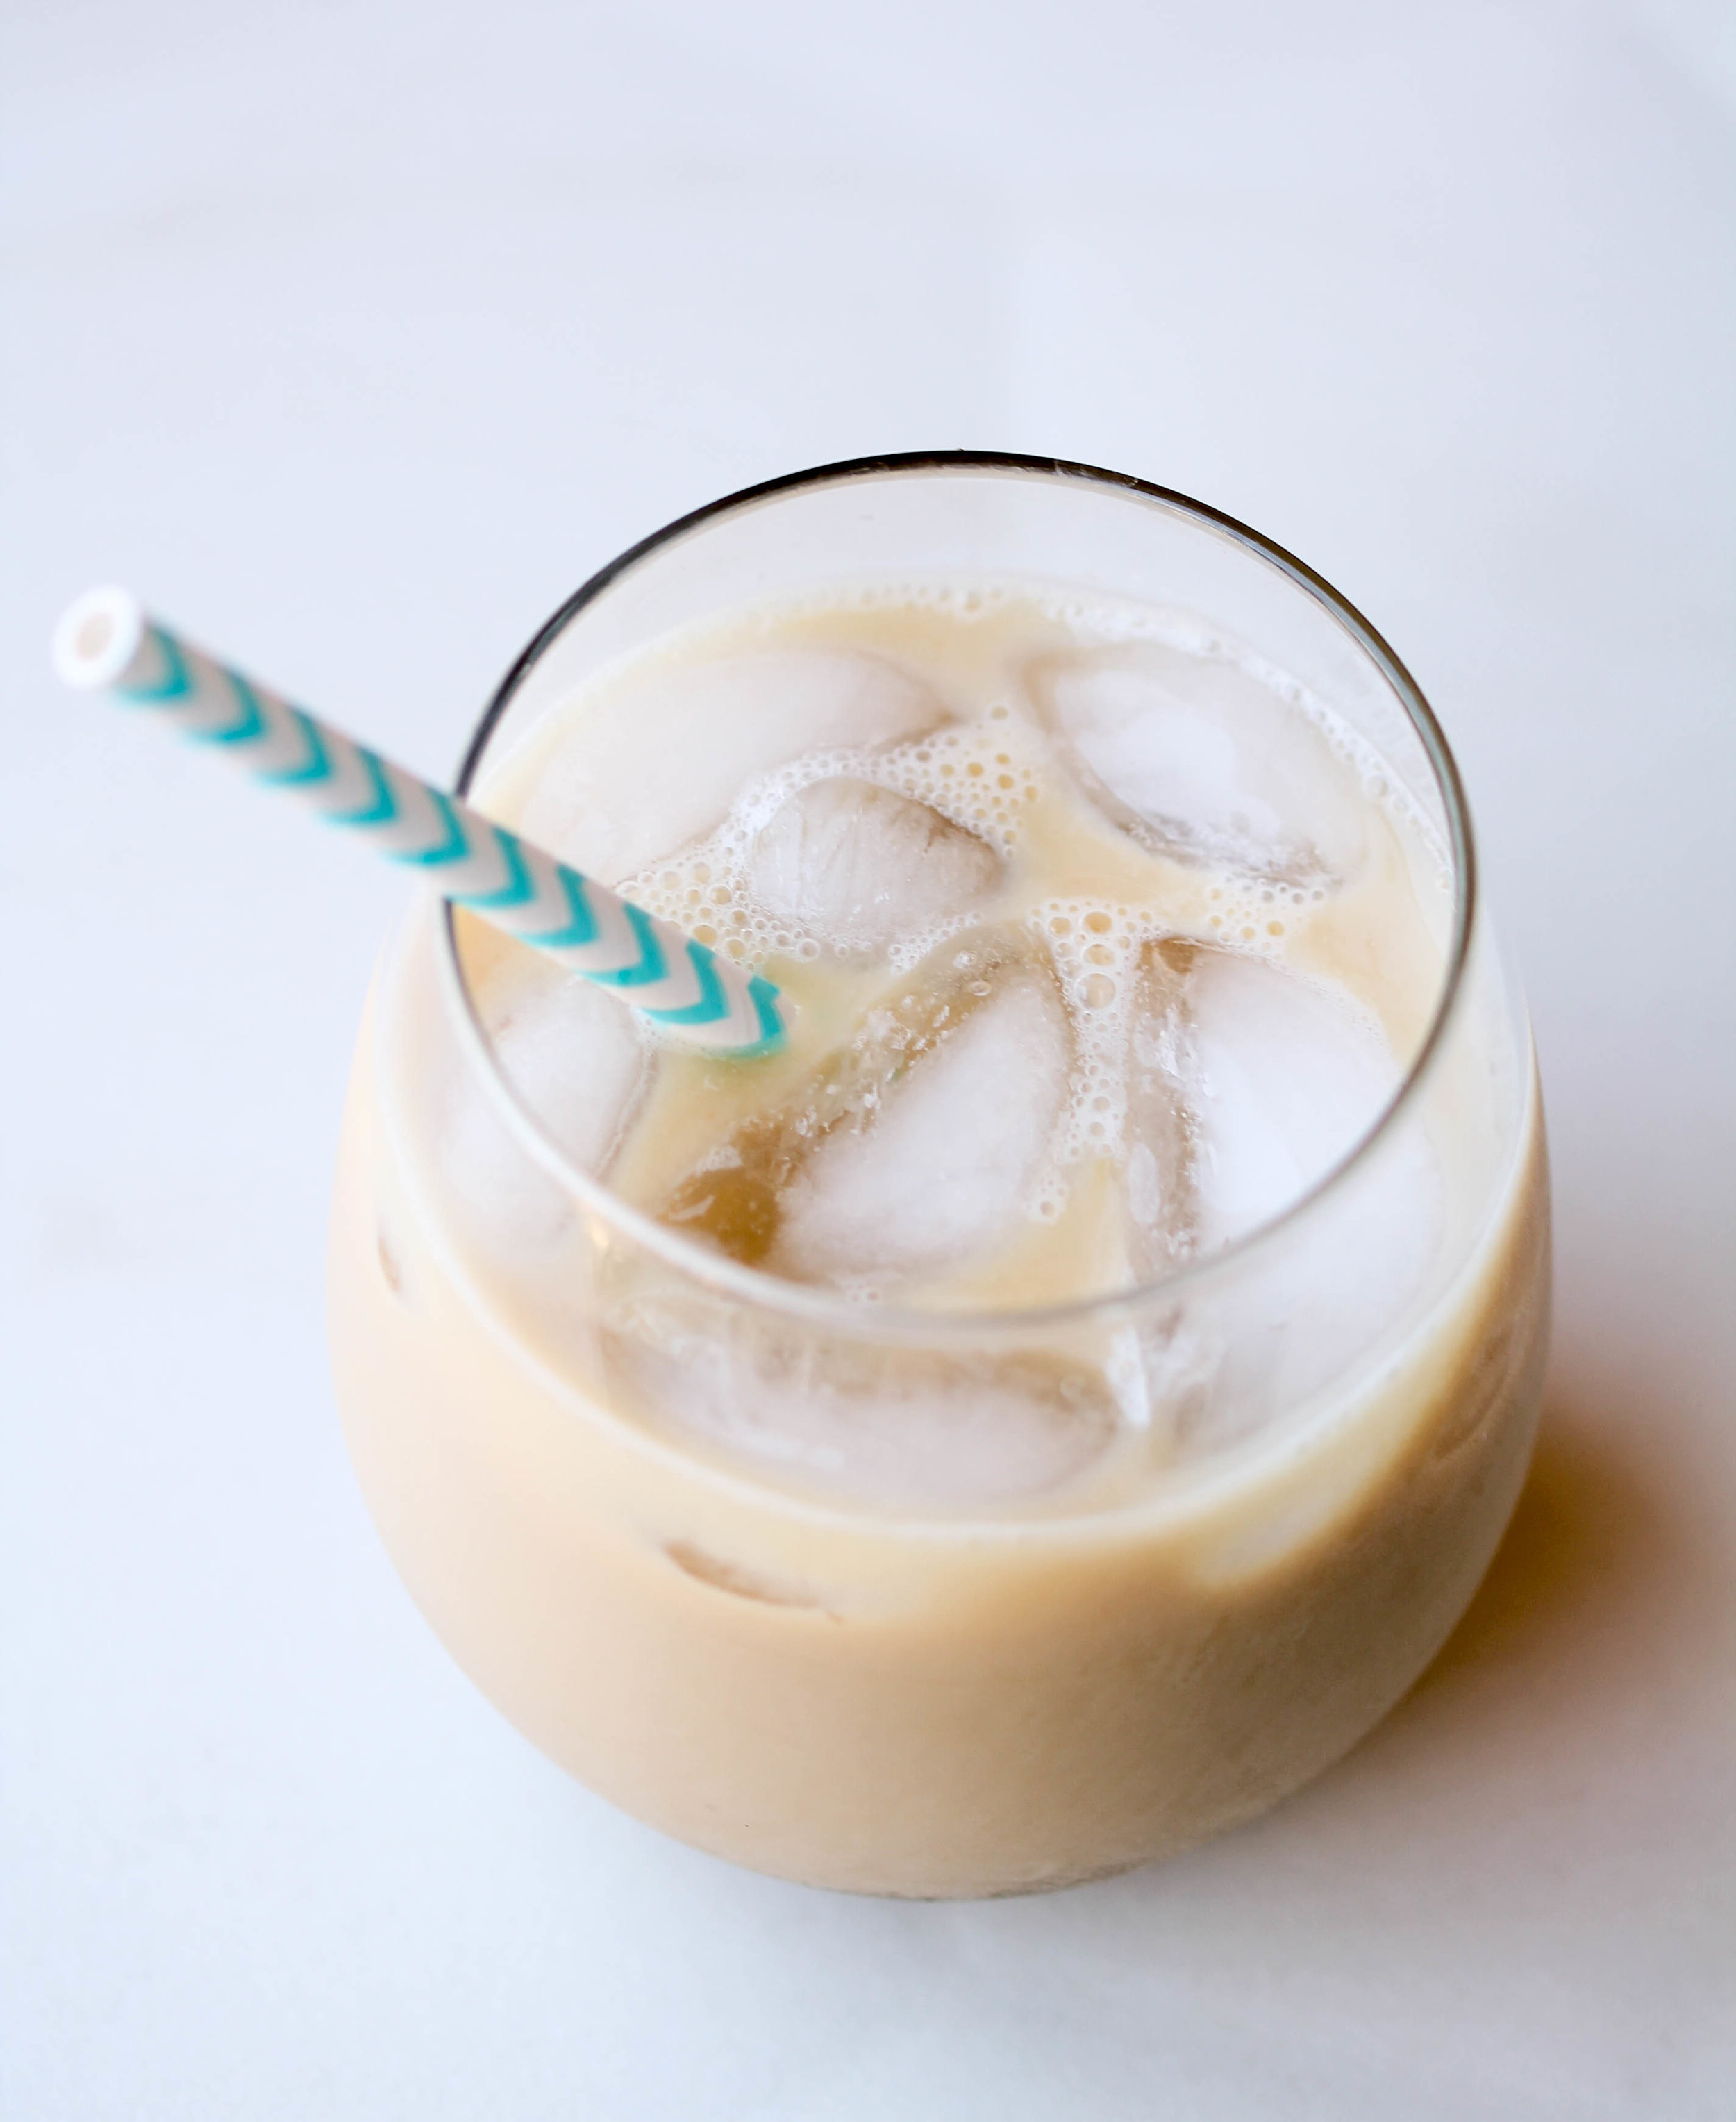 Make Instant Iced Latte in 2 minutes or less using instant coffee, sweetener and milk of your choice! It's super simple and doesn't require any fancy equipment.